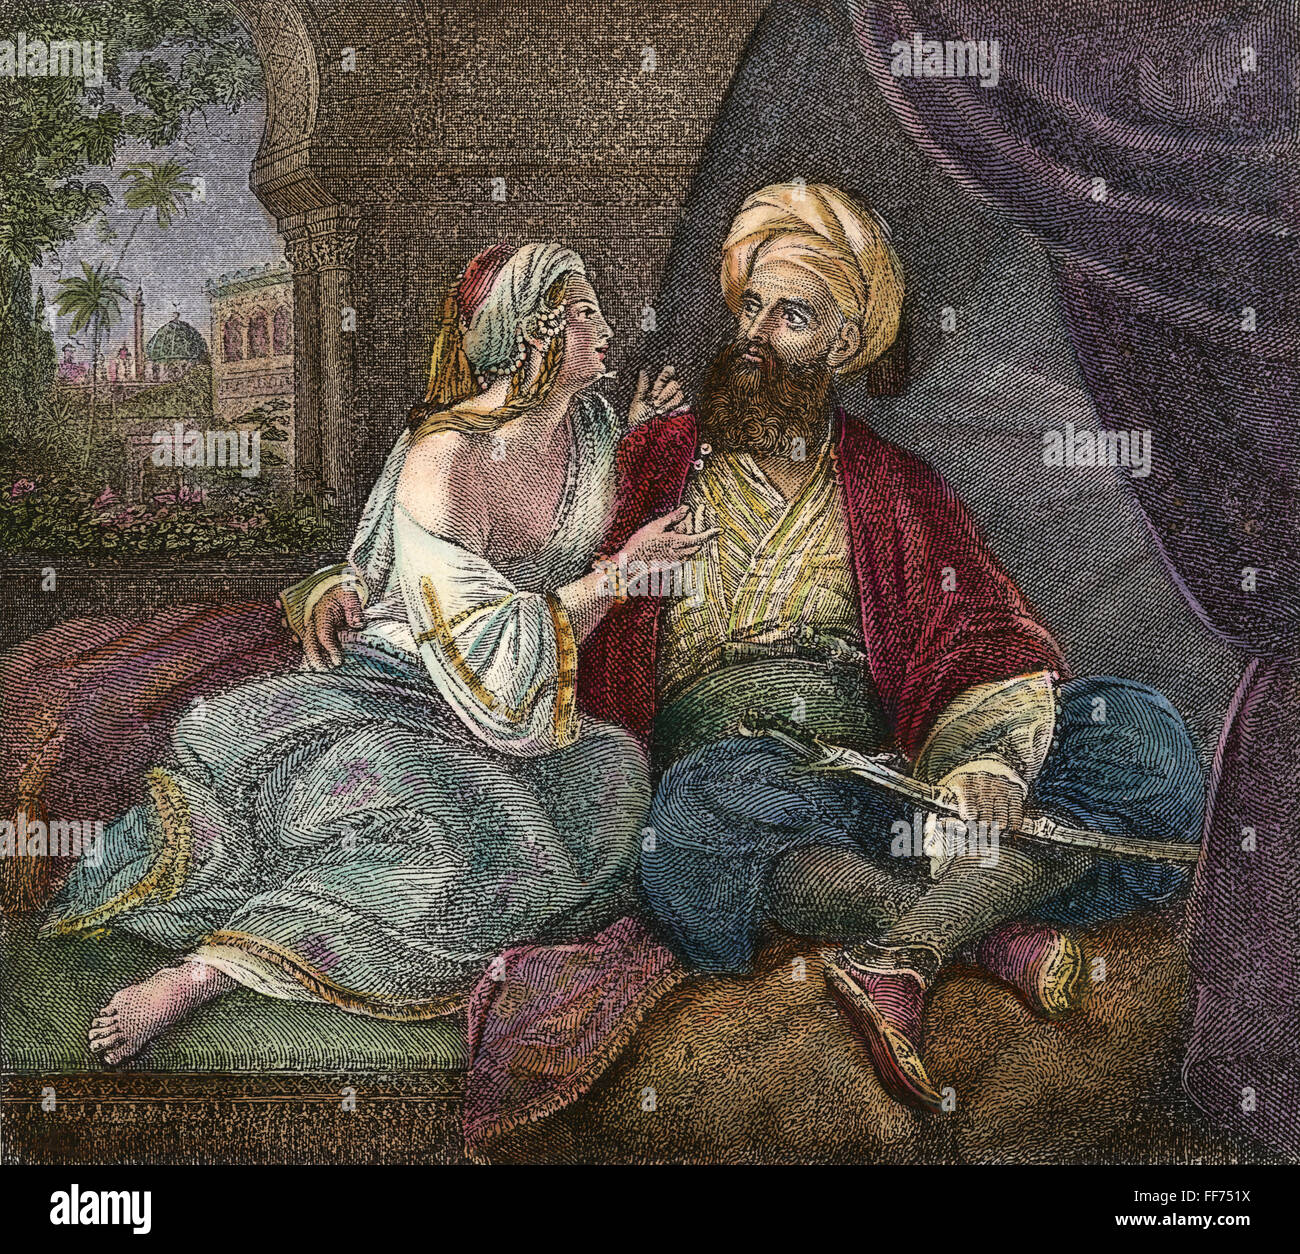 ARABIAN NIGHTS. /nScheherazade amusing the Sultan Schahriah and prolonging her life with the tales for a thousand and one nights. Colored engraving, 19th century. Stock Photo